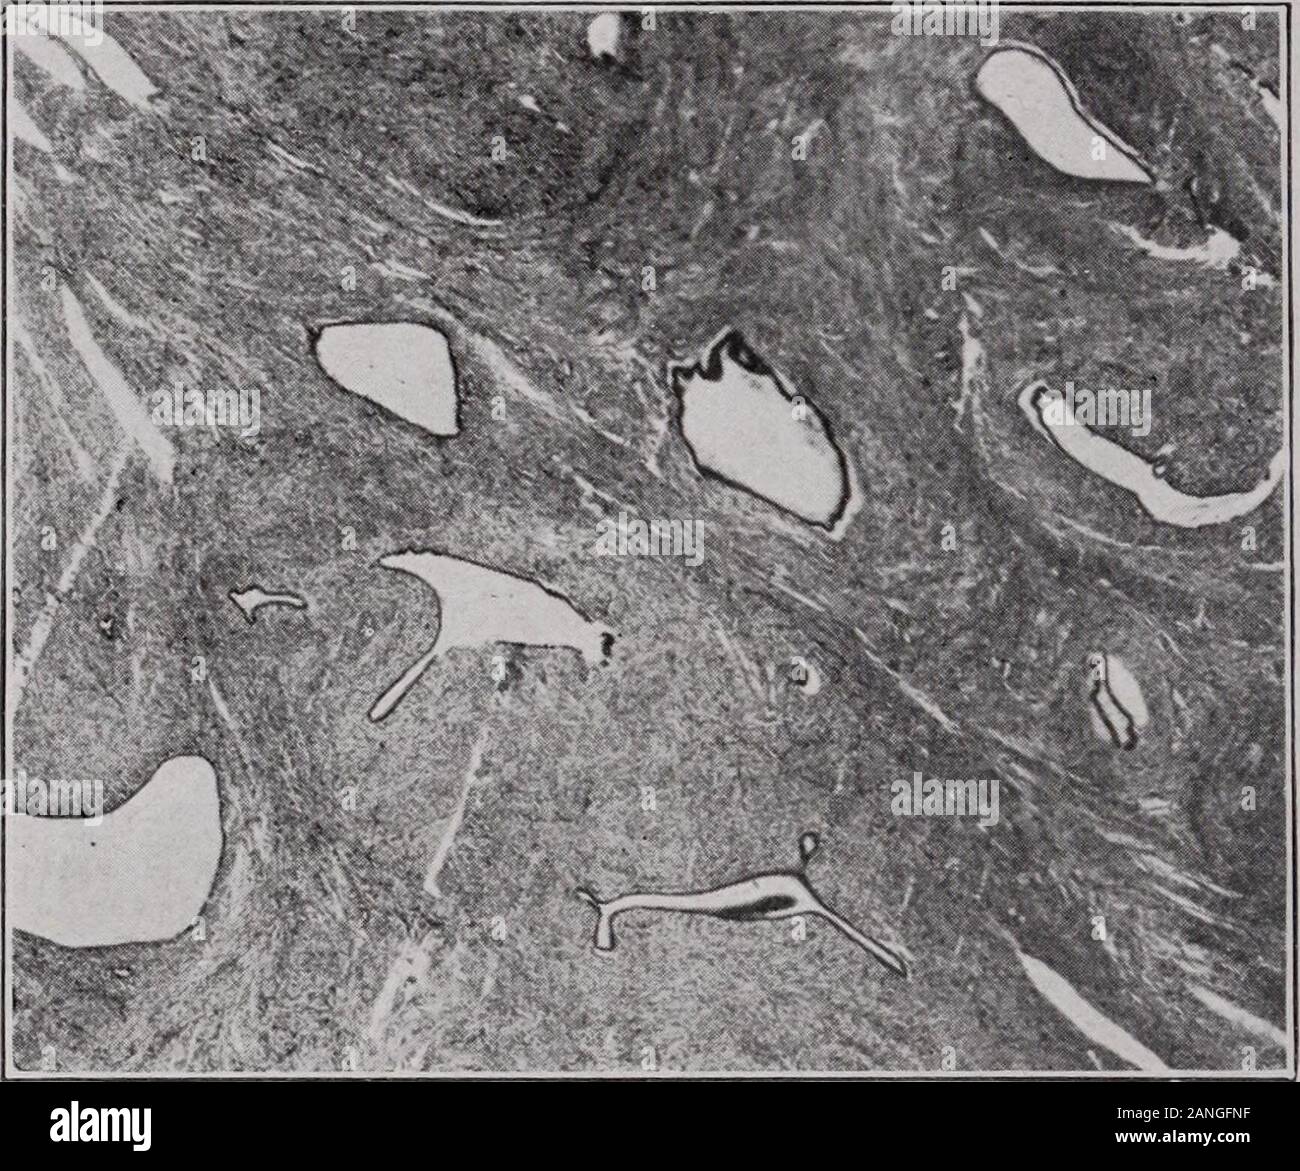 Transactions of the American Association of Obstetricians, Gynecologists, and Abdominal Surgeons for the year ... . Fig. 3.-—Cross section of submucous adenomyoma showing the muscular stroma perforatedby countless numbers of slightly dilated glands. Large cystic cavities are seen along the innerand lower portion of the picture. The intracanalicular portions can be made out in severalplaces. instances these glands are surrounded by an endometrium-like stroma.The involved portion of the uterine wall at the site of the former at-tachment of the tumor has the same structure which is characteristic Stock Photo